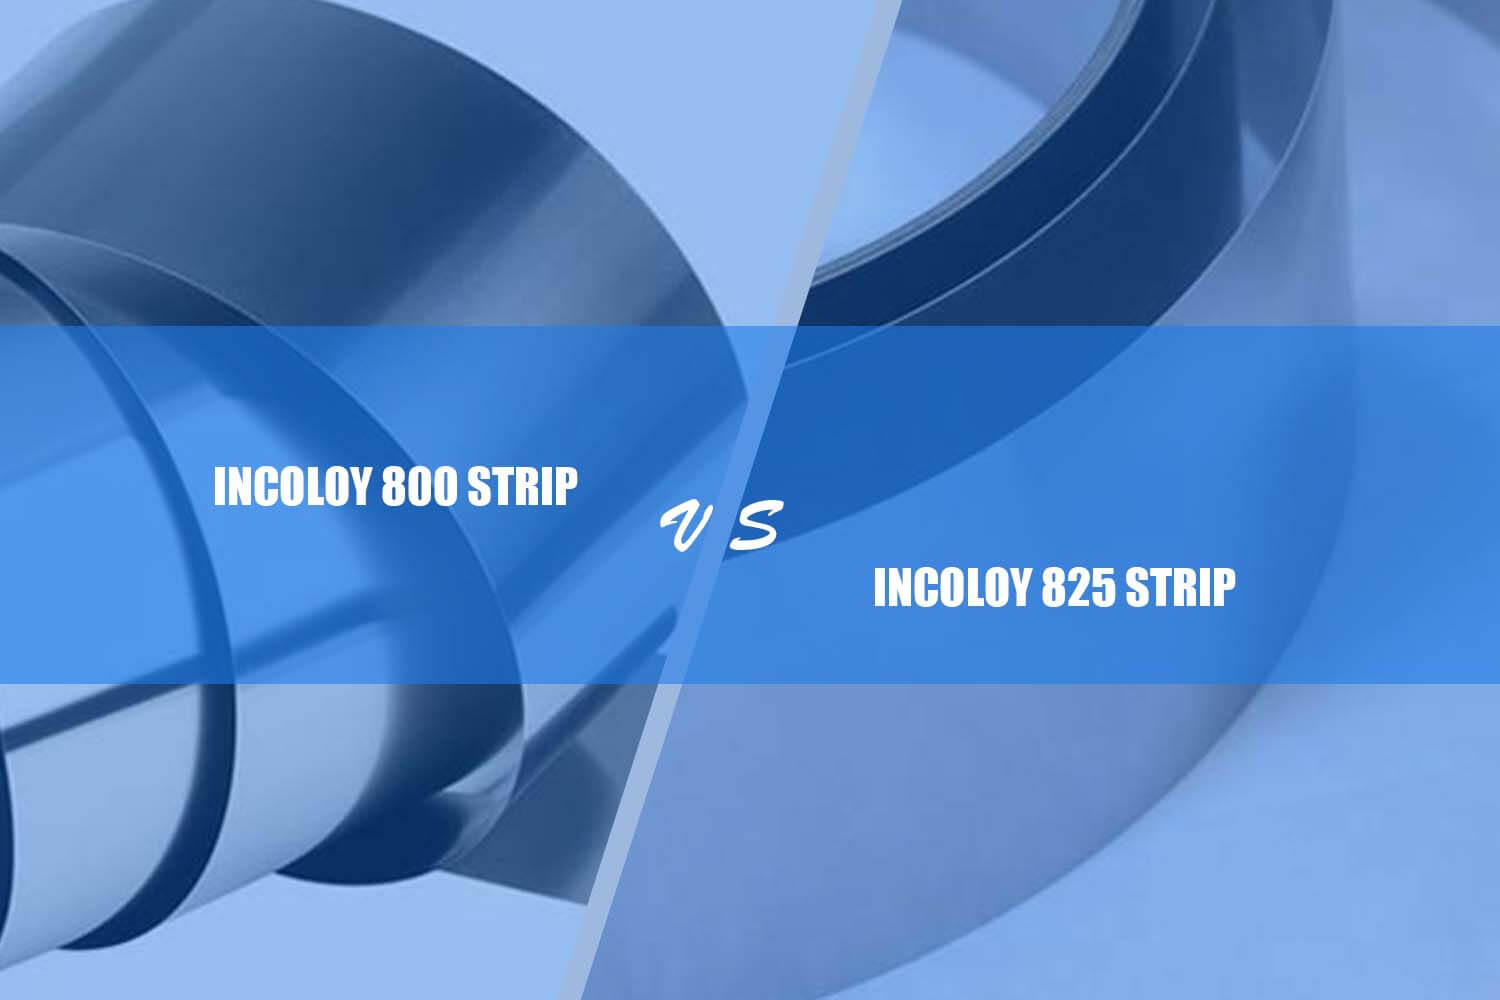 difference between incoloy 800 strip and incoloy 825 banda